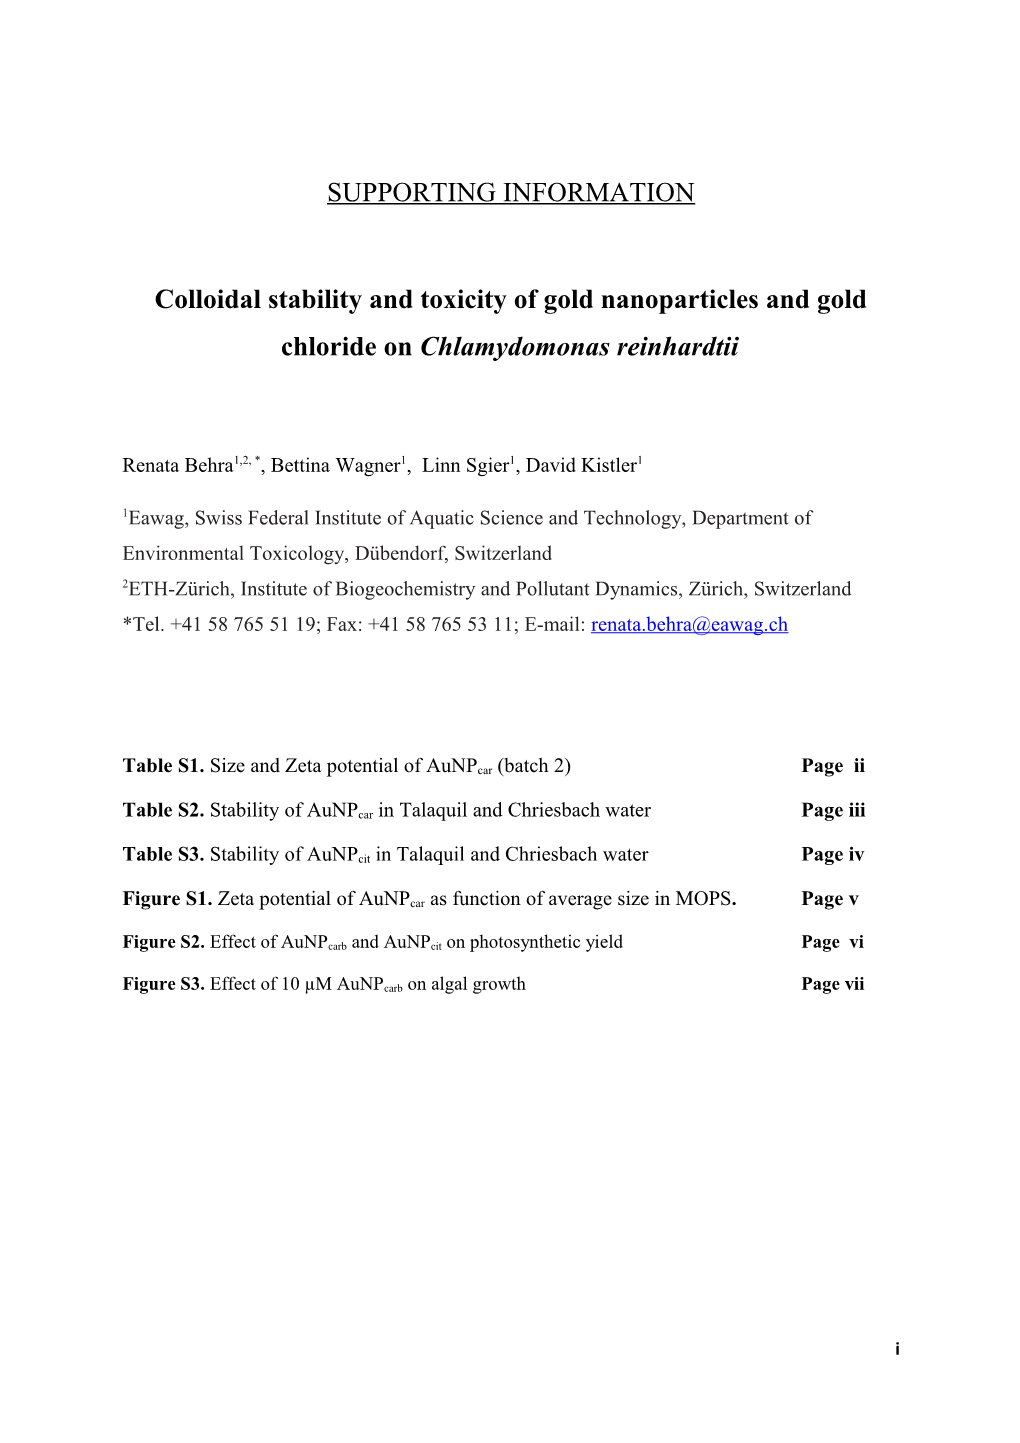 Colloidal Stability and Toxicity of Gold Nanoparticles and Gold Chloride on Chlamydomonas